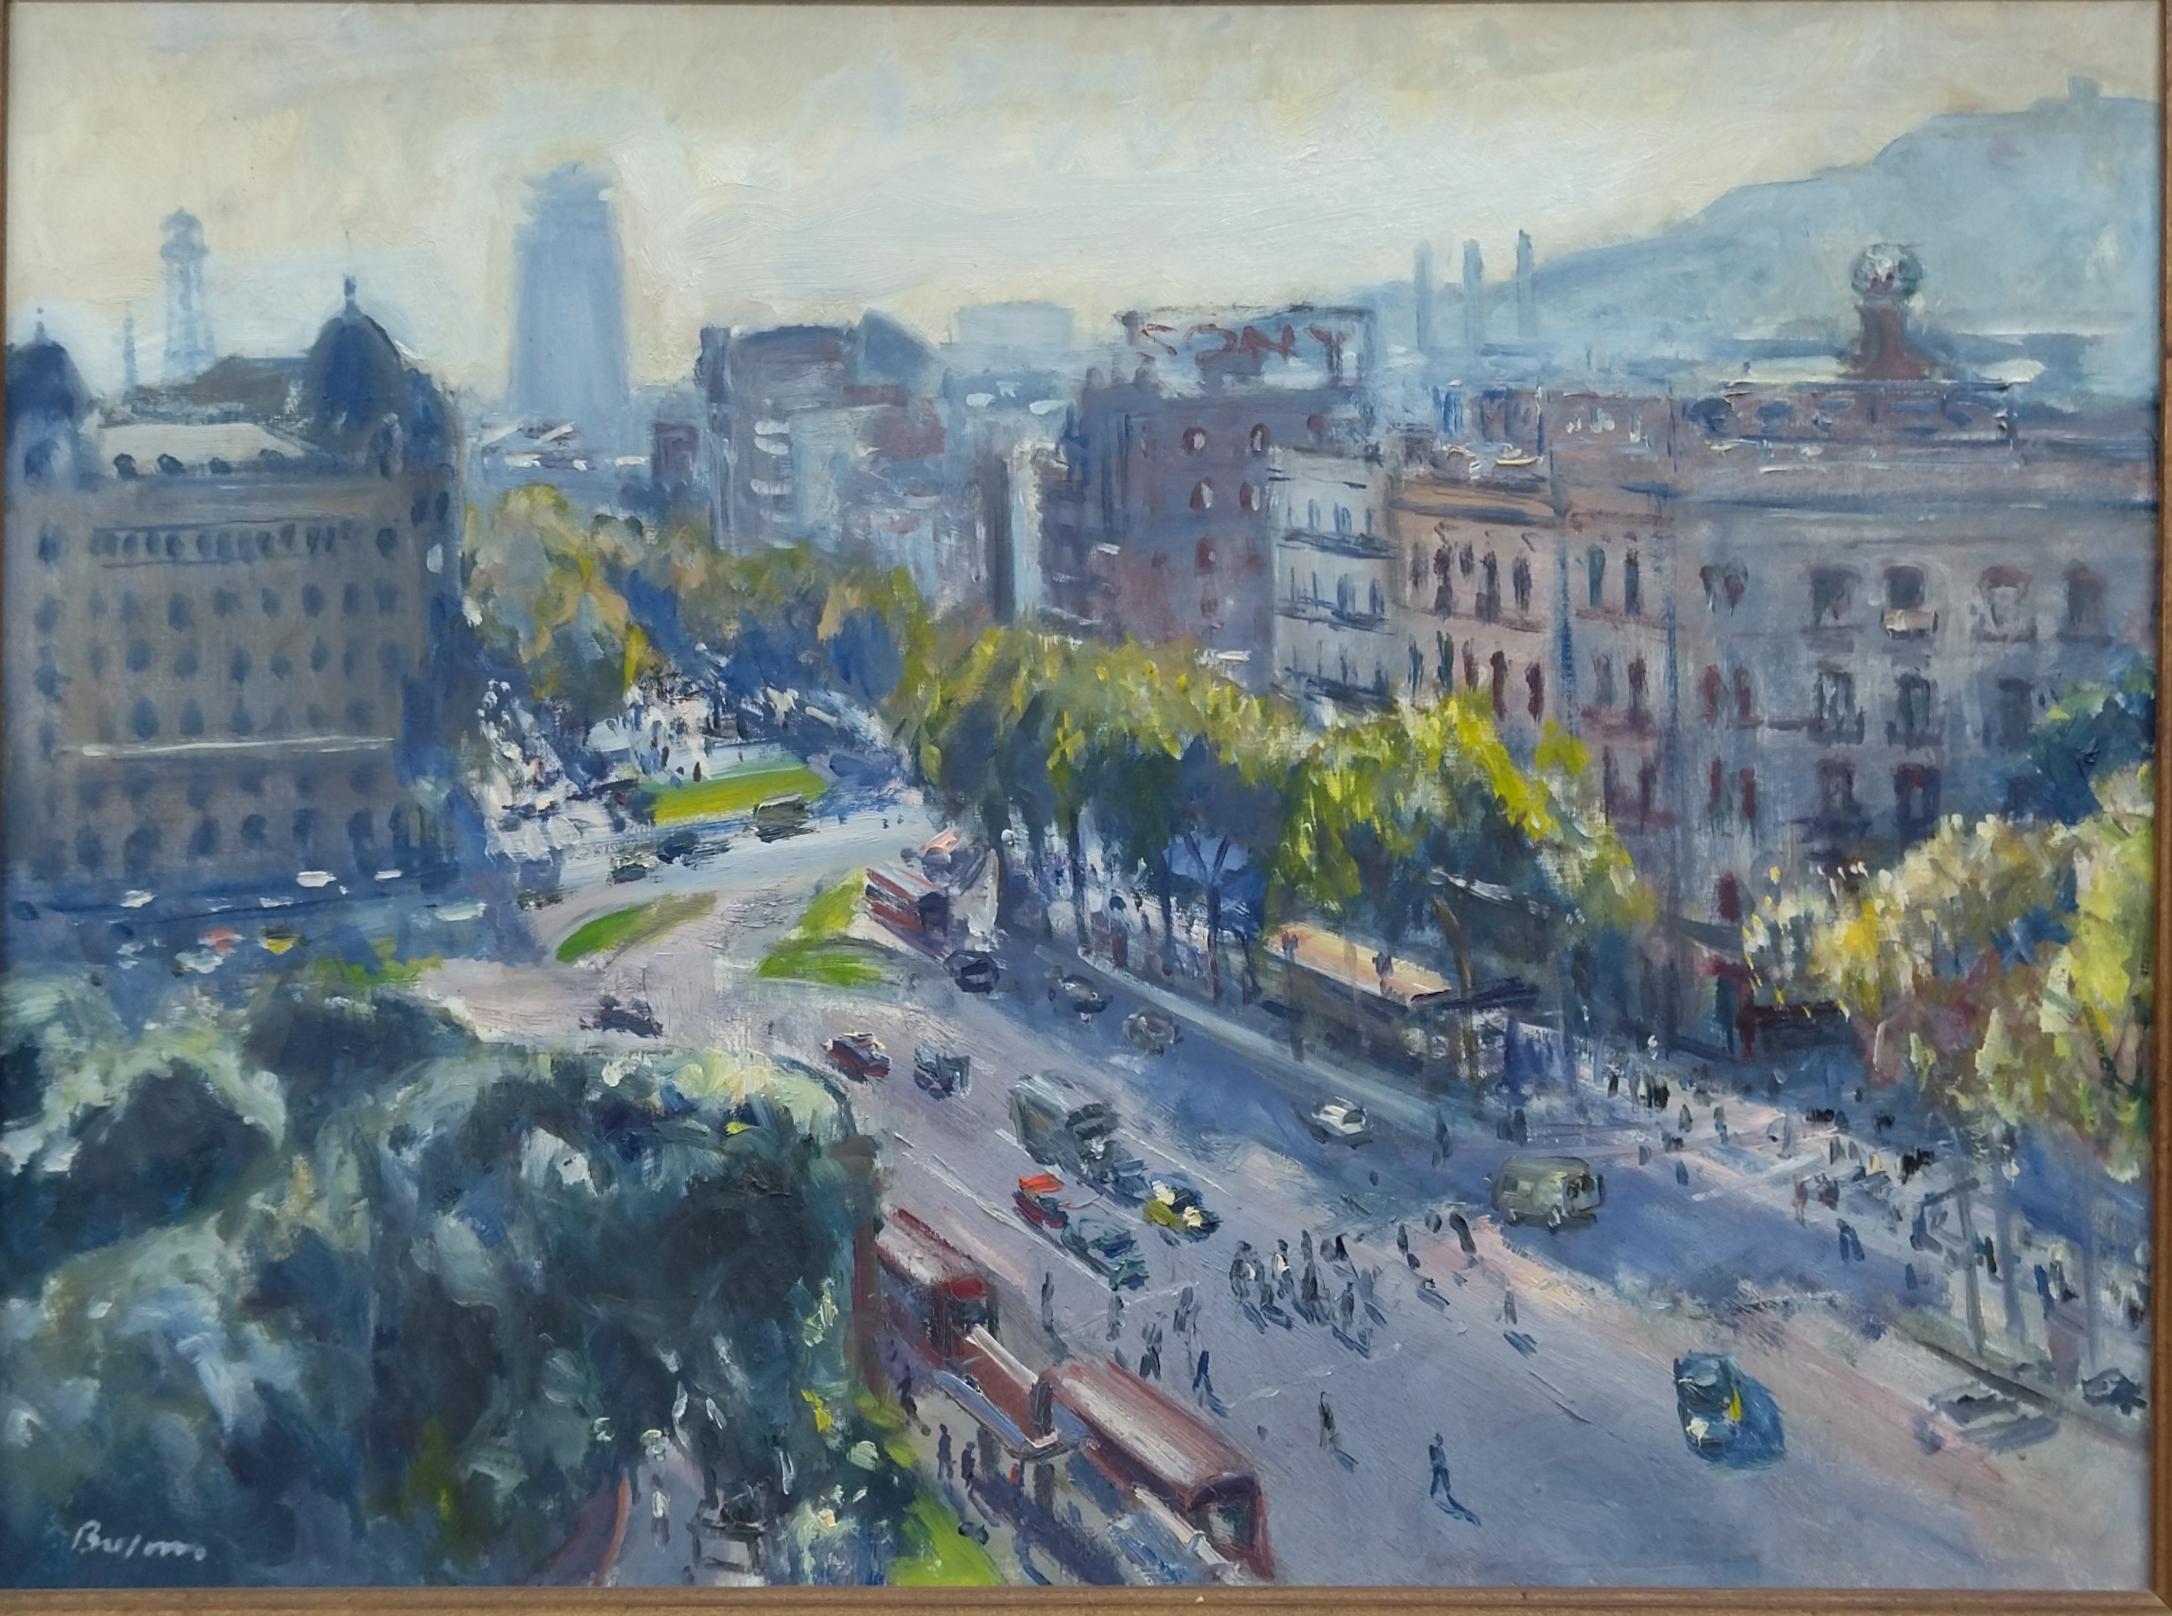 Plaza Cataluña, Barcelona oil painting.  - Fauvist Painting by Simo Busom